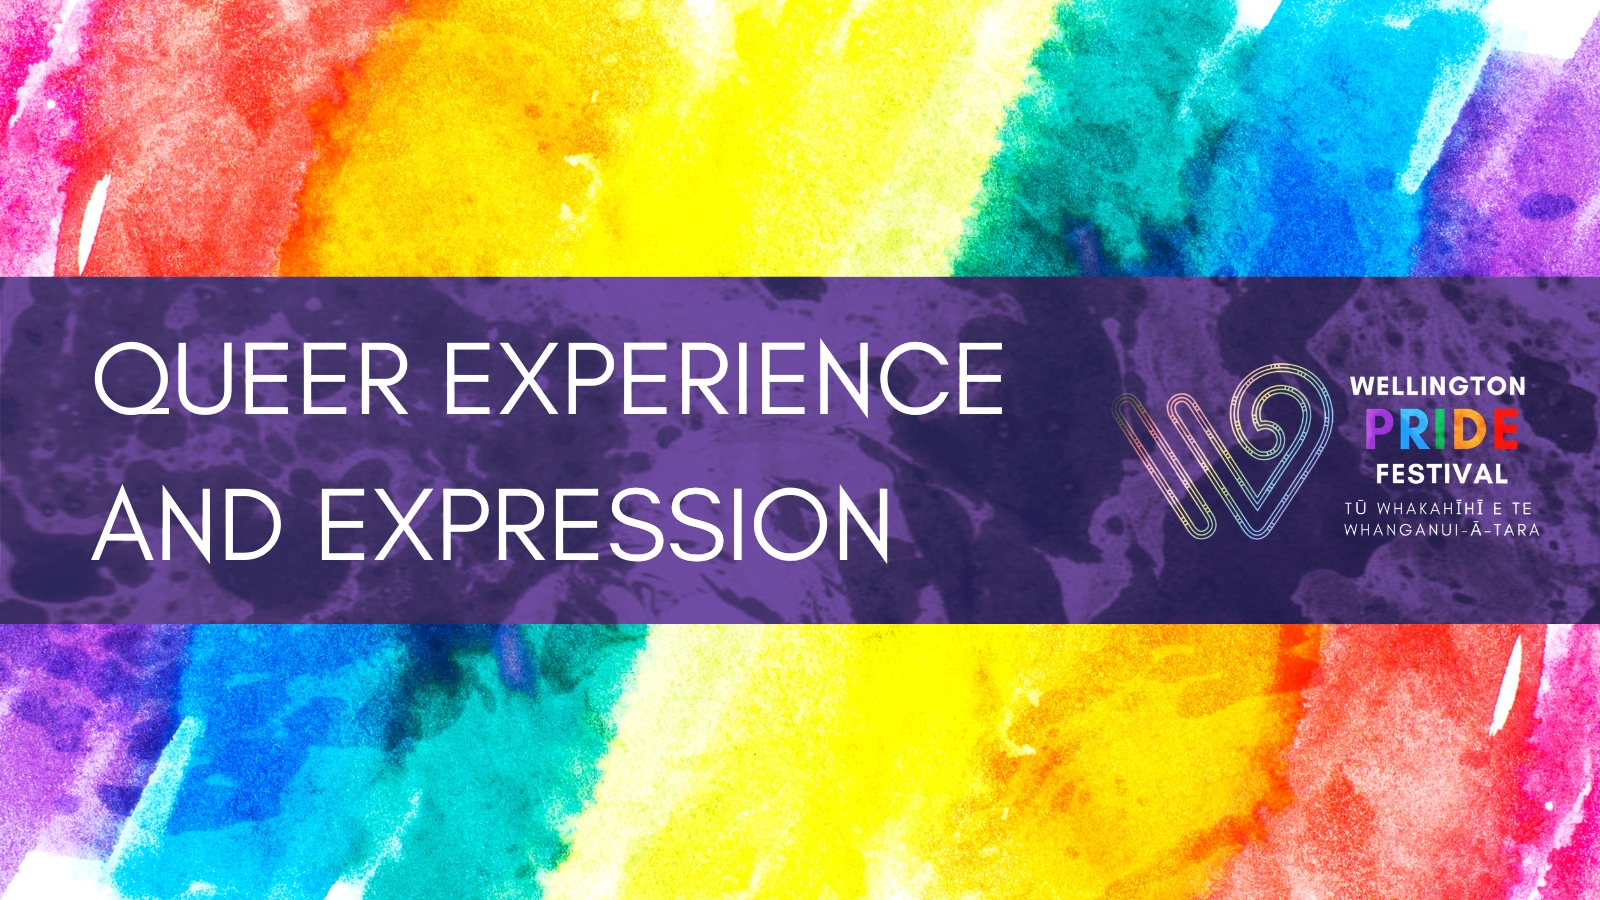 Facebook event link for Queer Experience and Expression